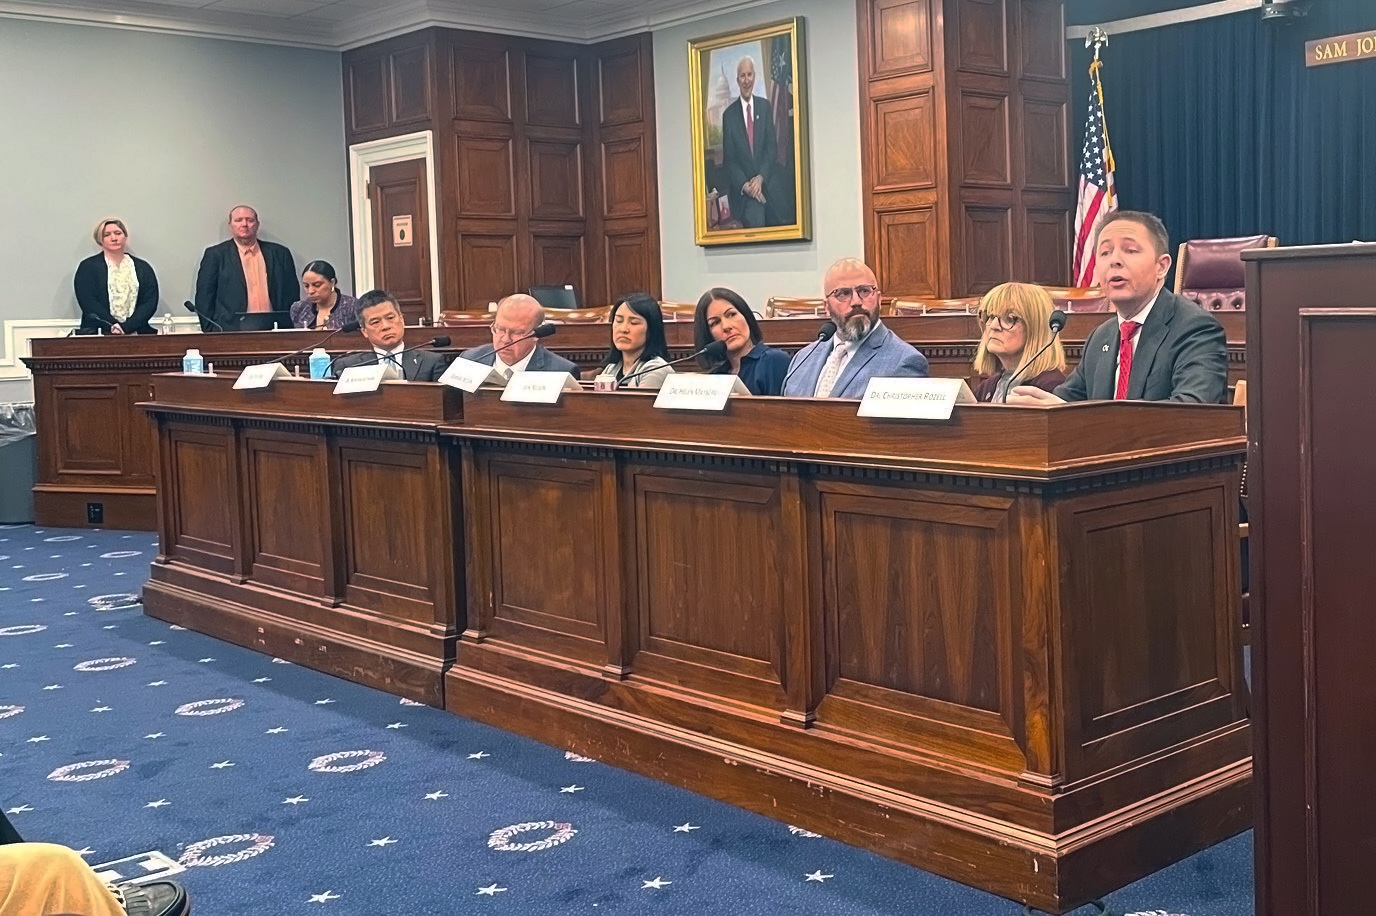 Georgia Tech Engineering Professor Chris Rozell shared his research and the impacts of the past decade of brain research funded by the NIH BRAIN Initiative with Congress.